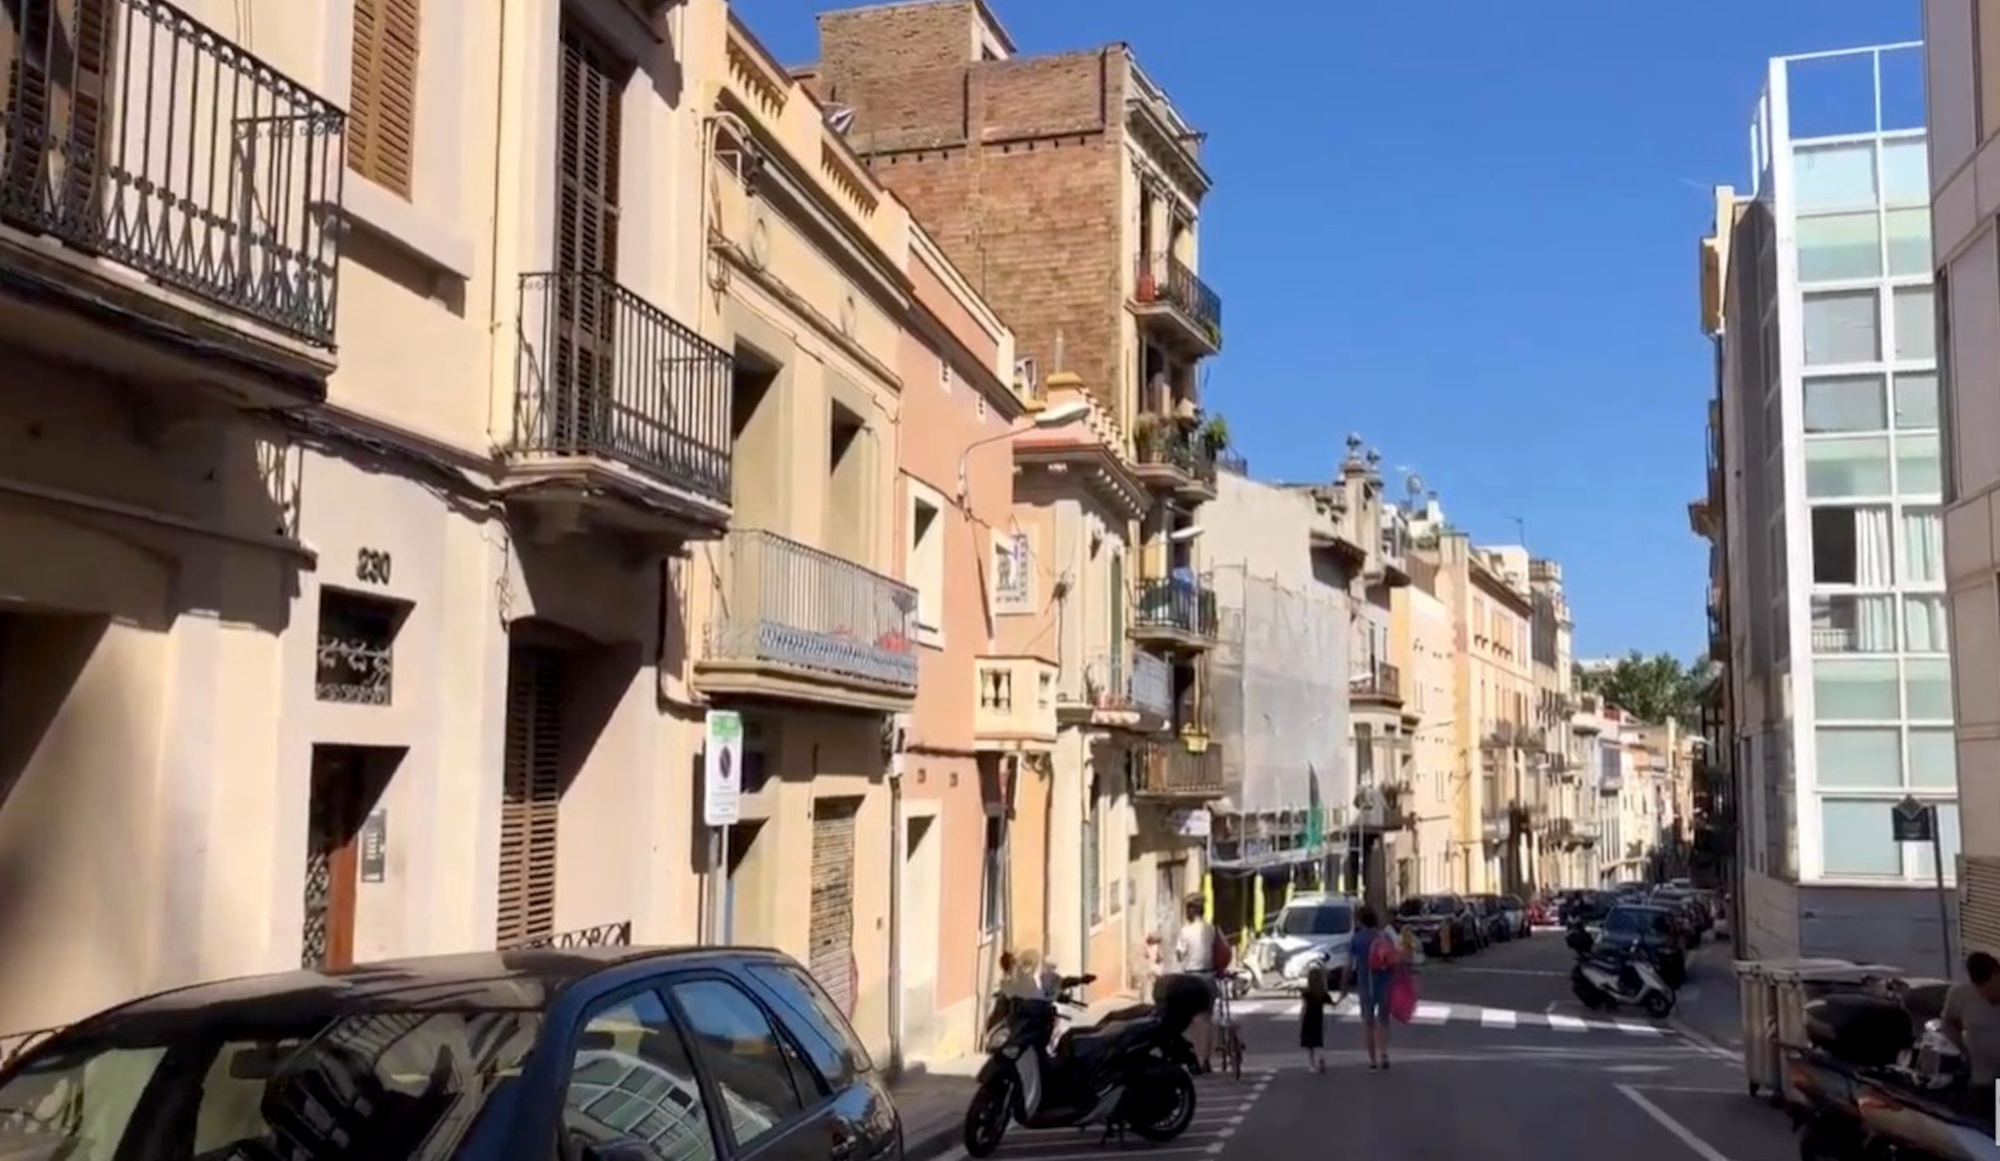 The Dutch tourist had gone into a supermarket in Barcelona's Sarria district